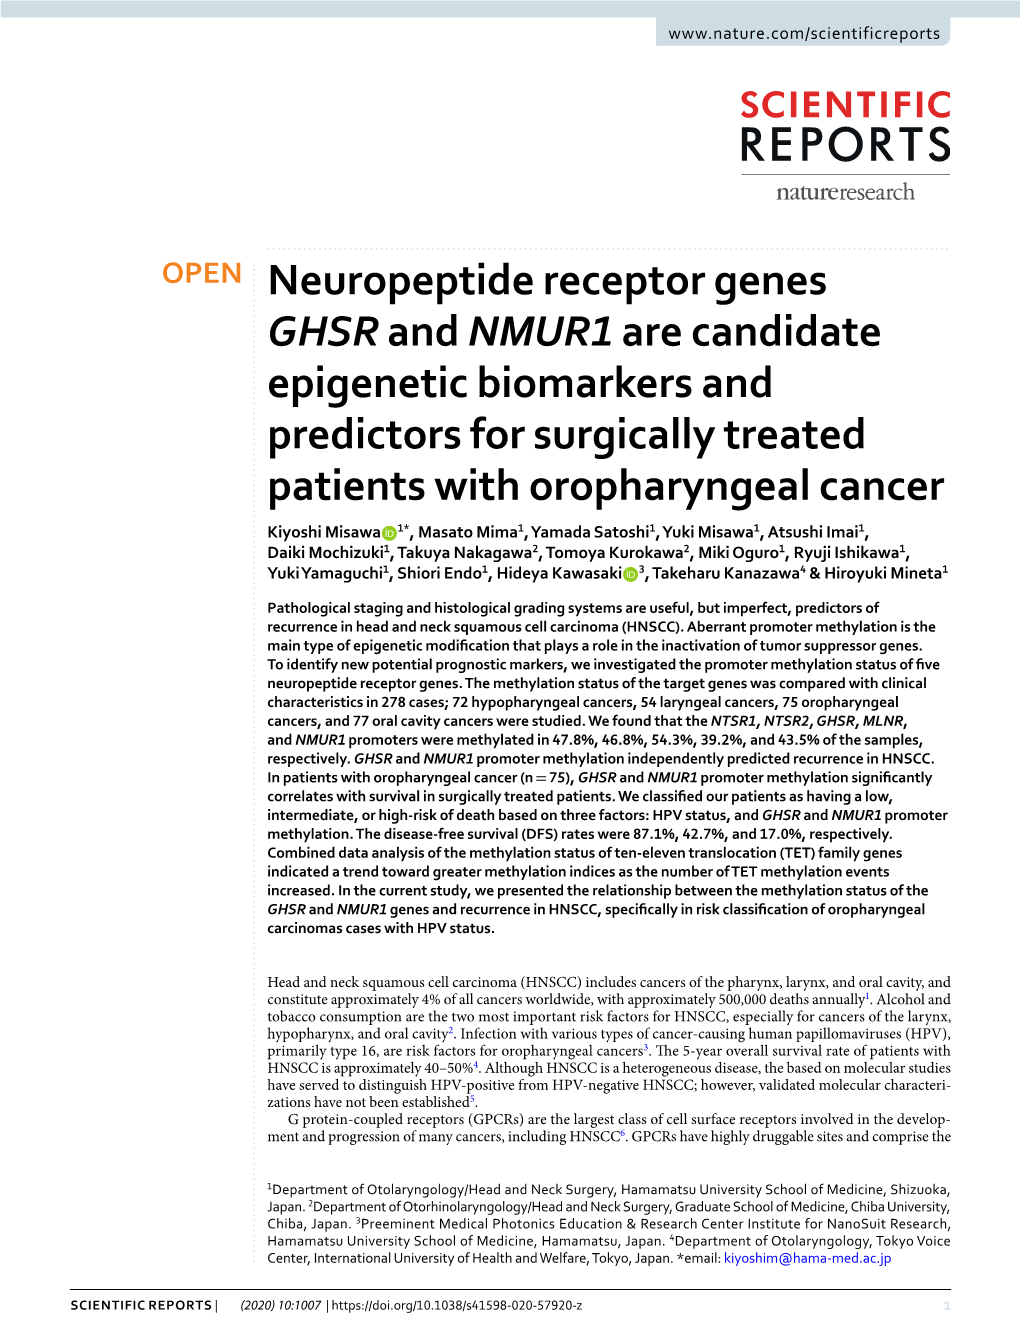 Neuropeptide Receptor Genes GHSR and NMUR1 Are Candidate